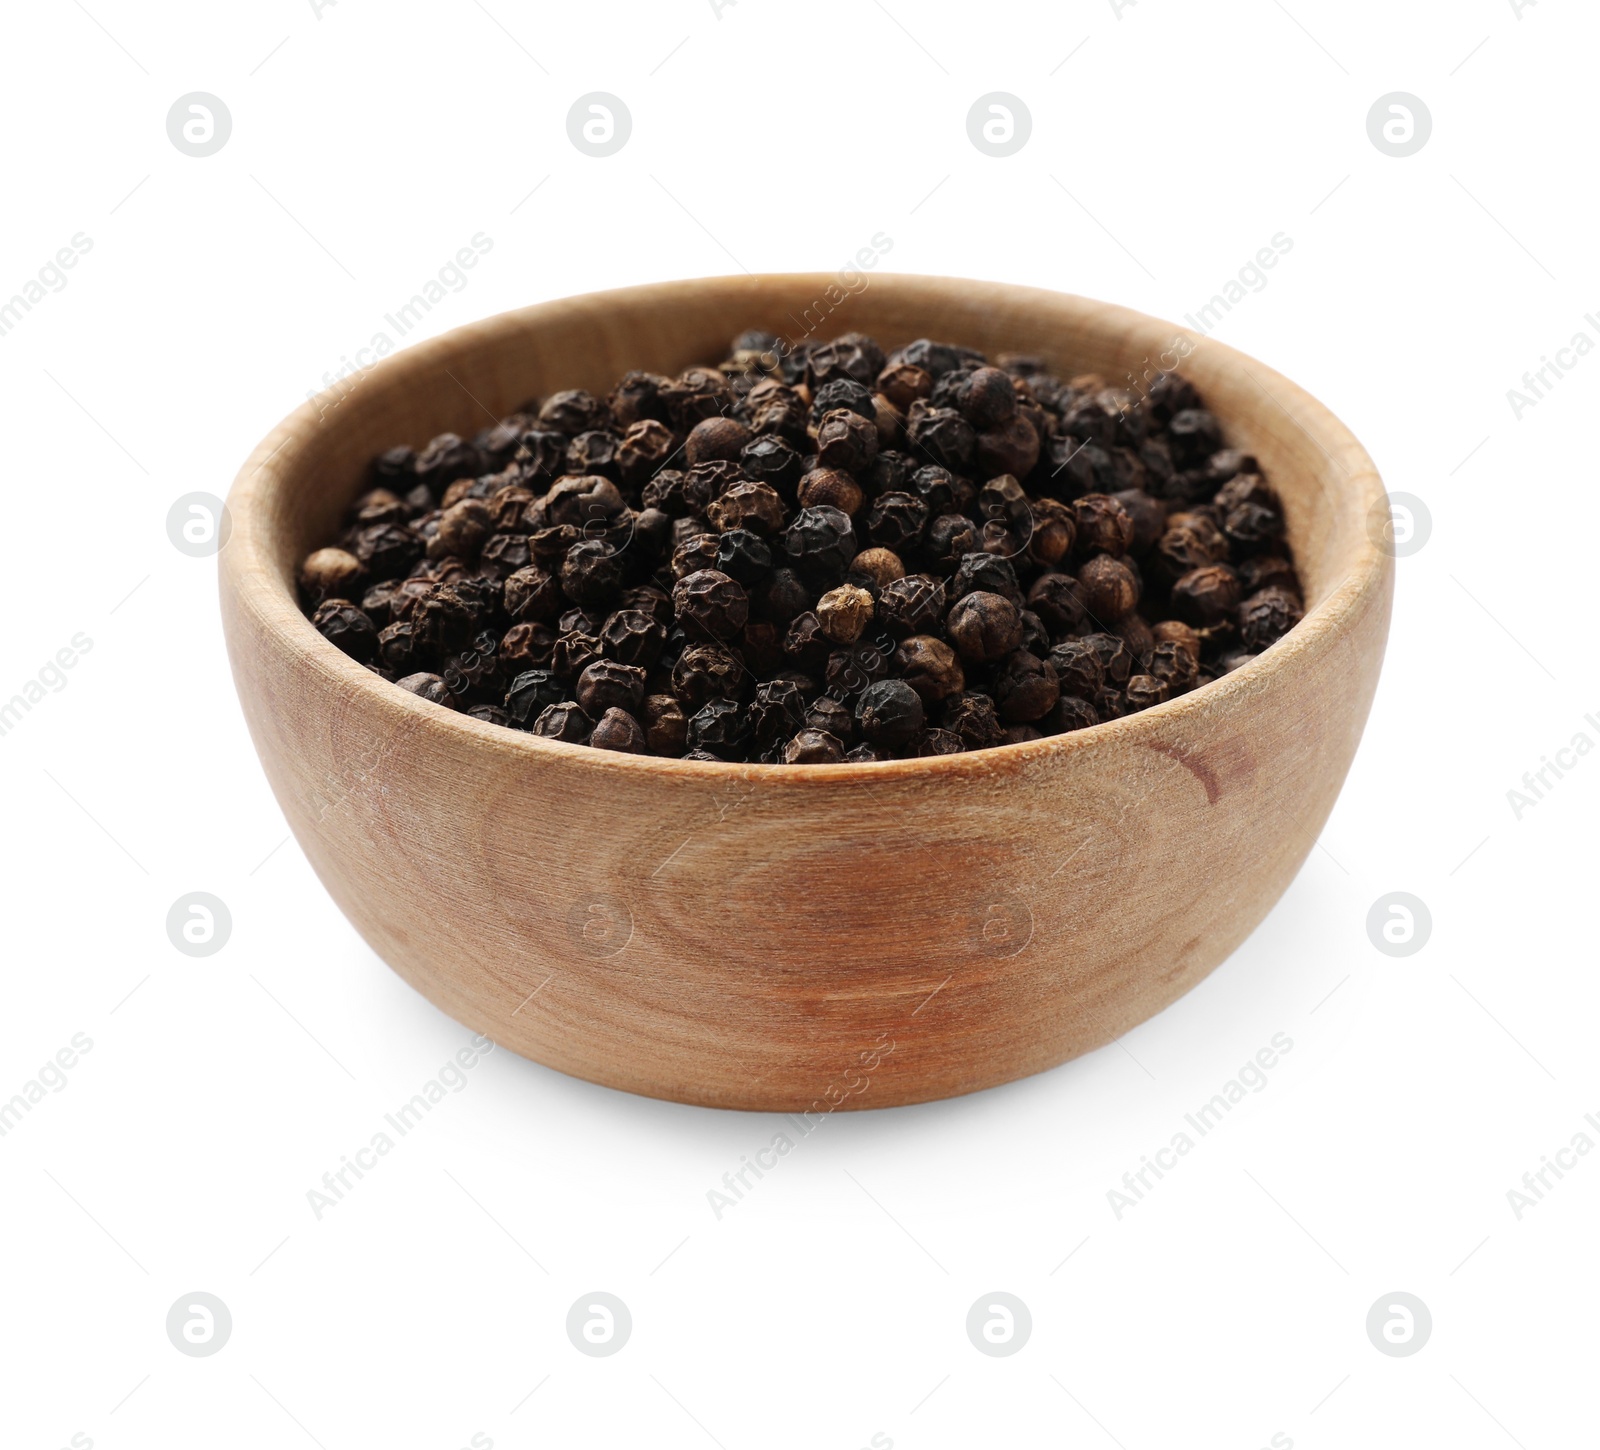 Photo of Aromatic spice. Many black peppercorns in bowl isolated on white